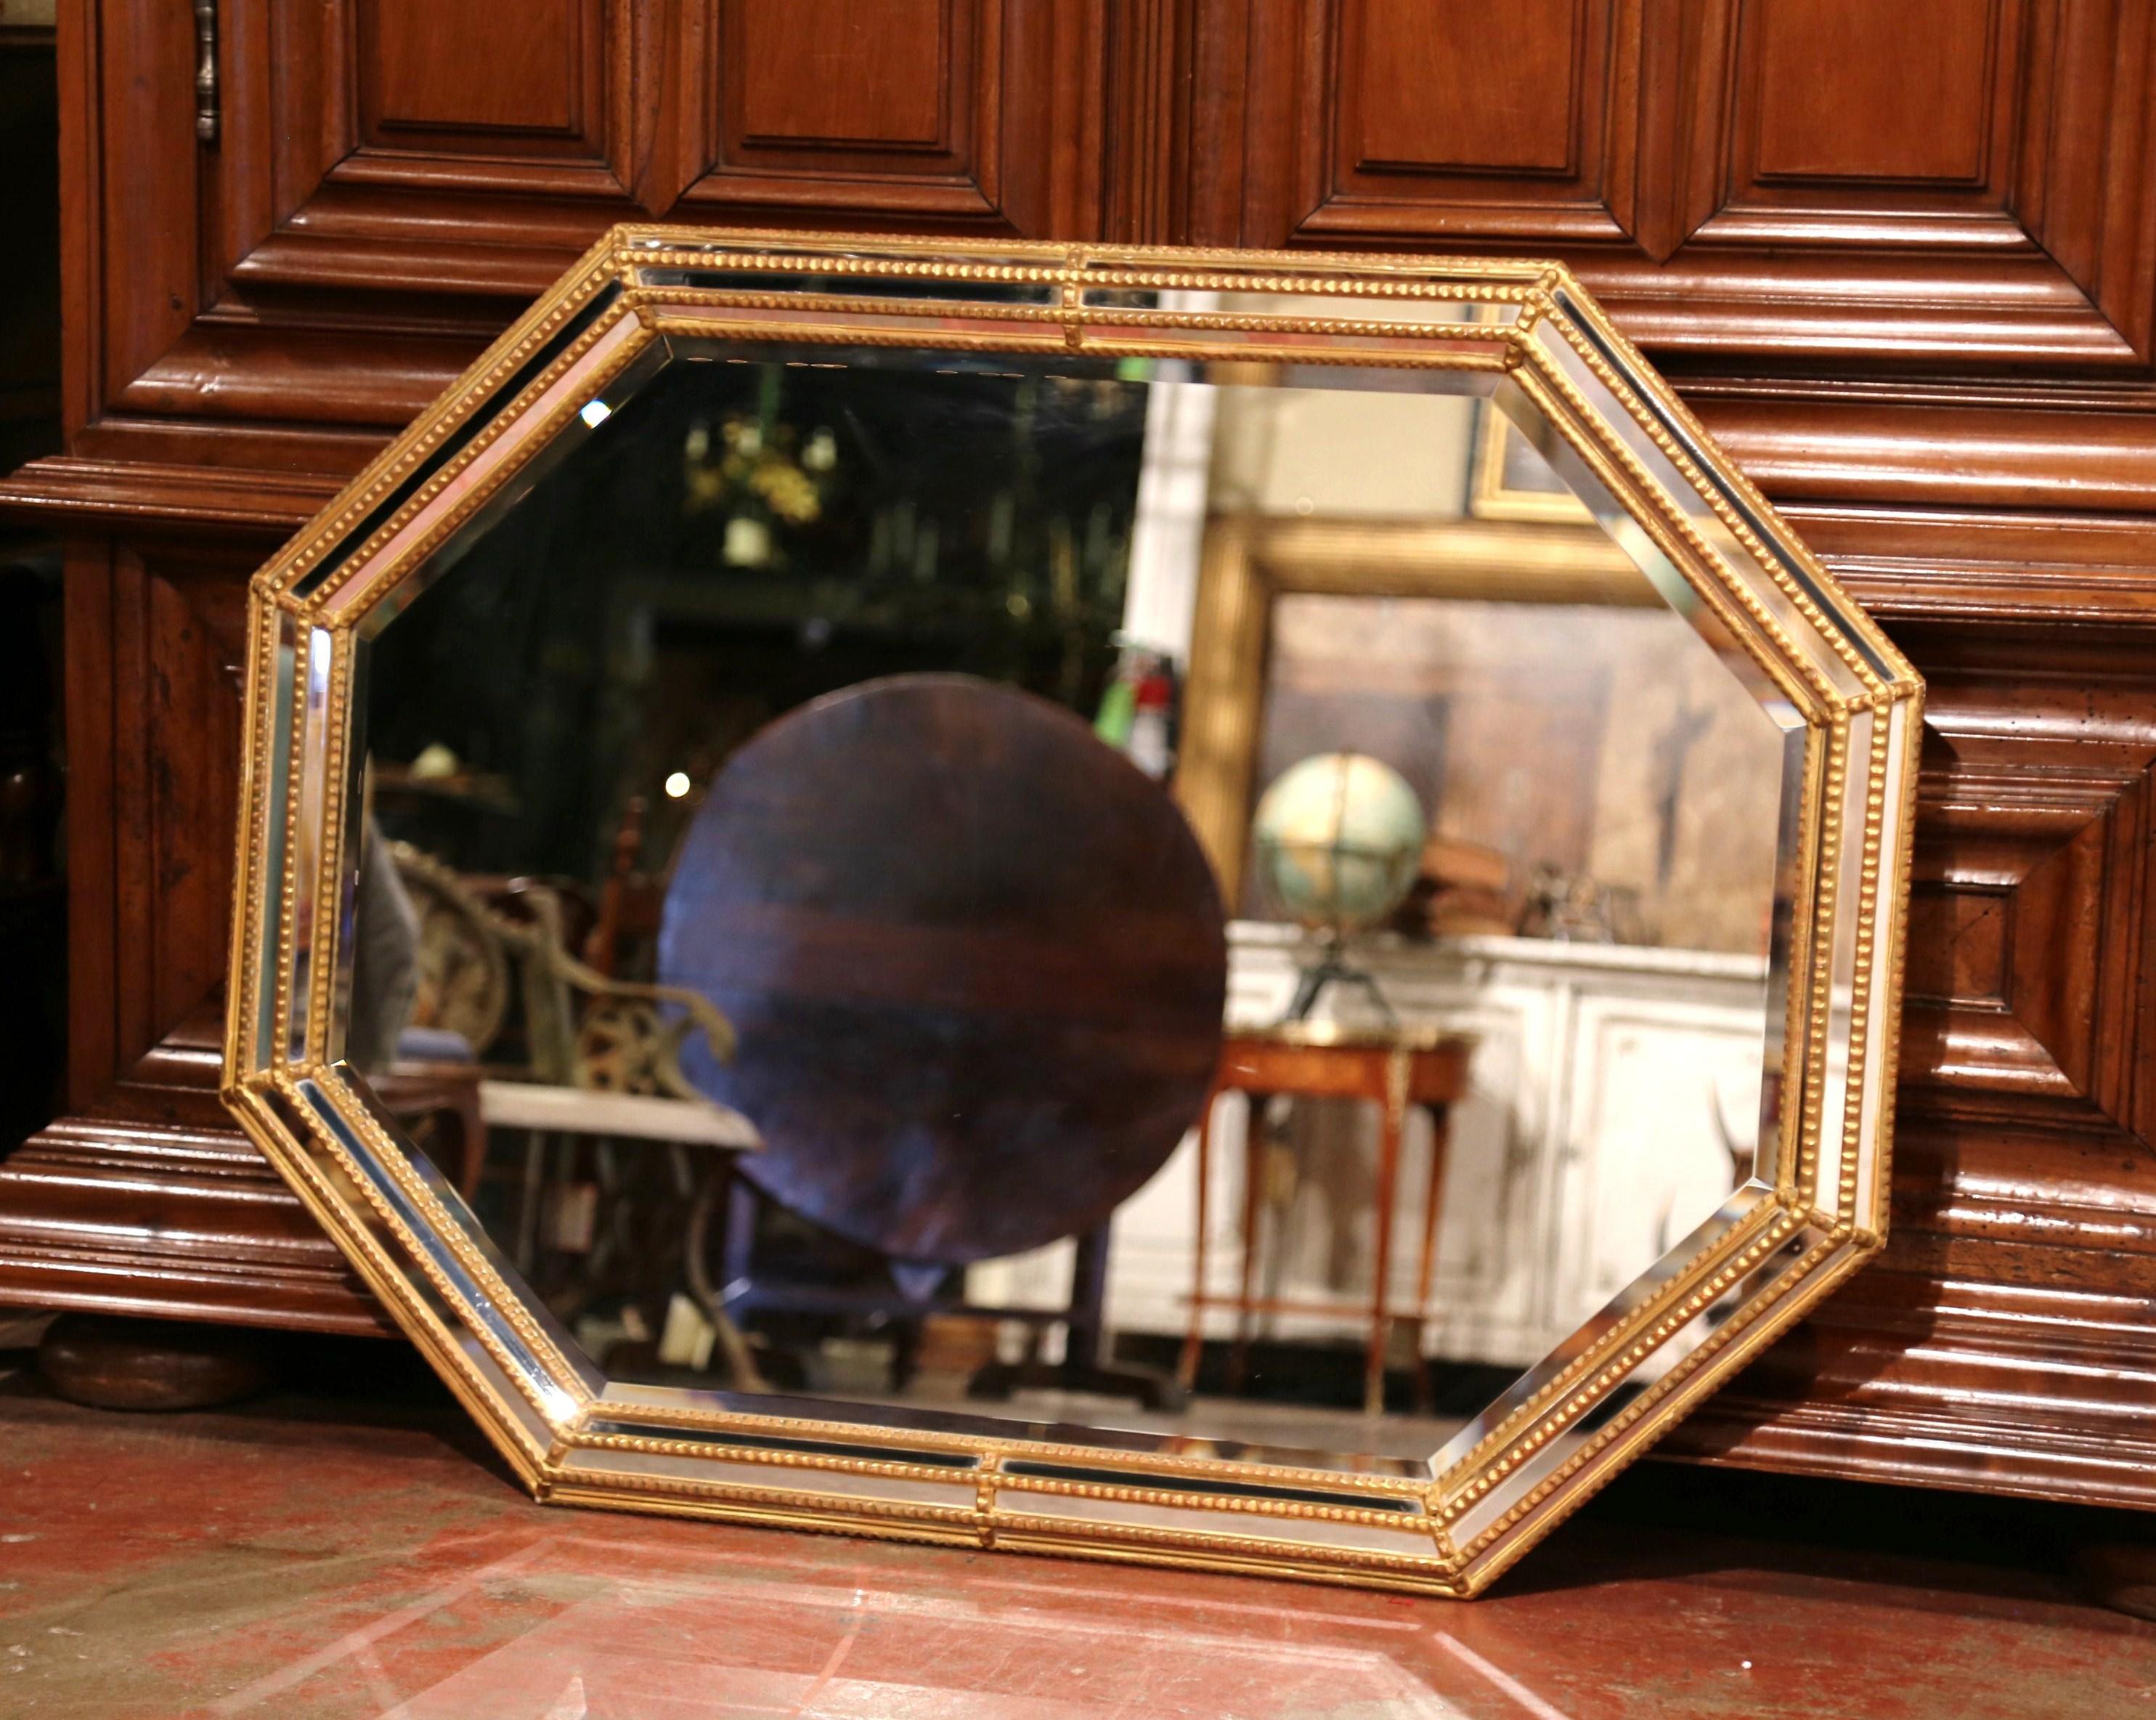 This elegant antique mirror was created in France, circa 1900. Octagonal in shape, the versatile mirror can be hang either horizontally or vertically; it features three rows of small mirror insets around the periphery, and a larger mirror in the